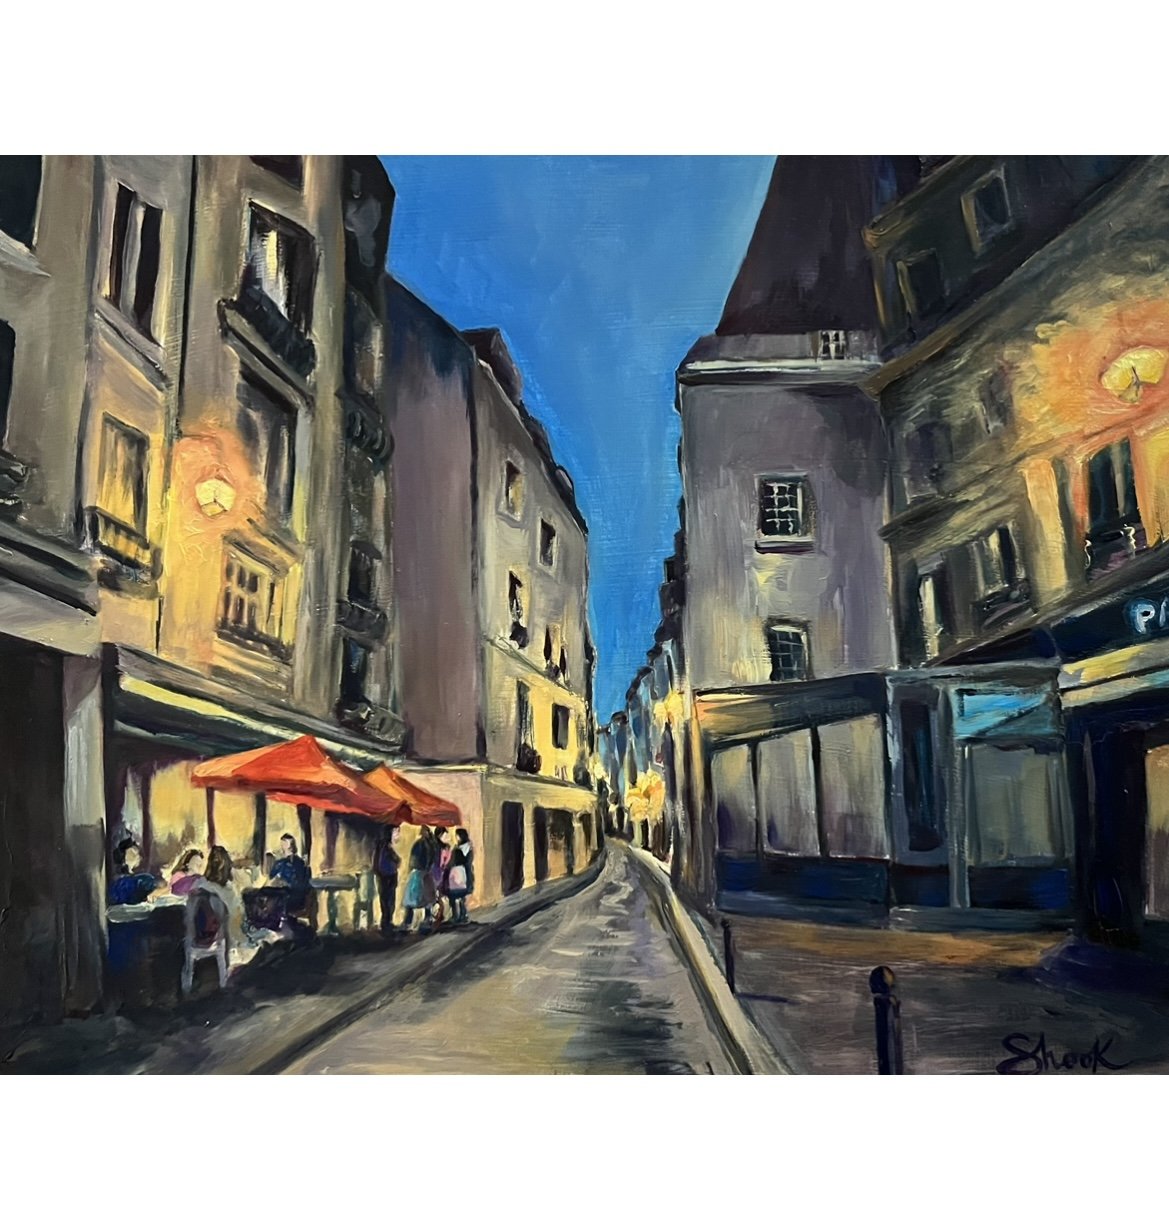 Night Cafe - 11"x14" - SOLD